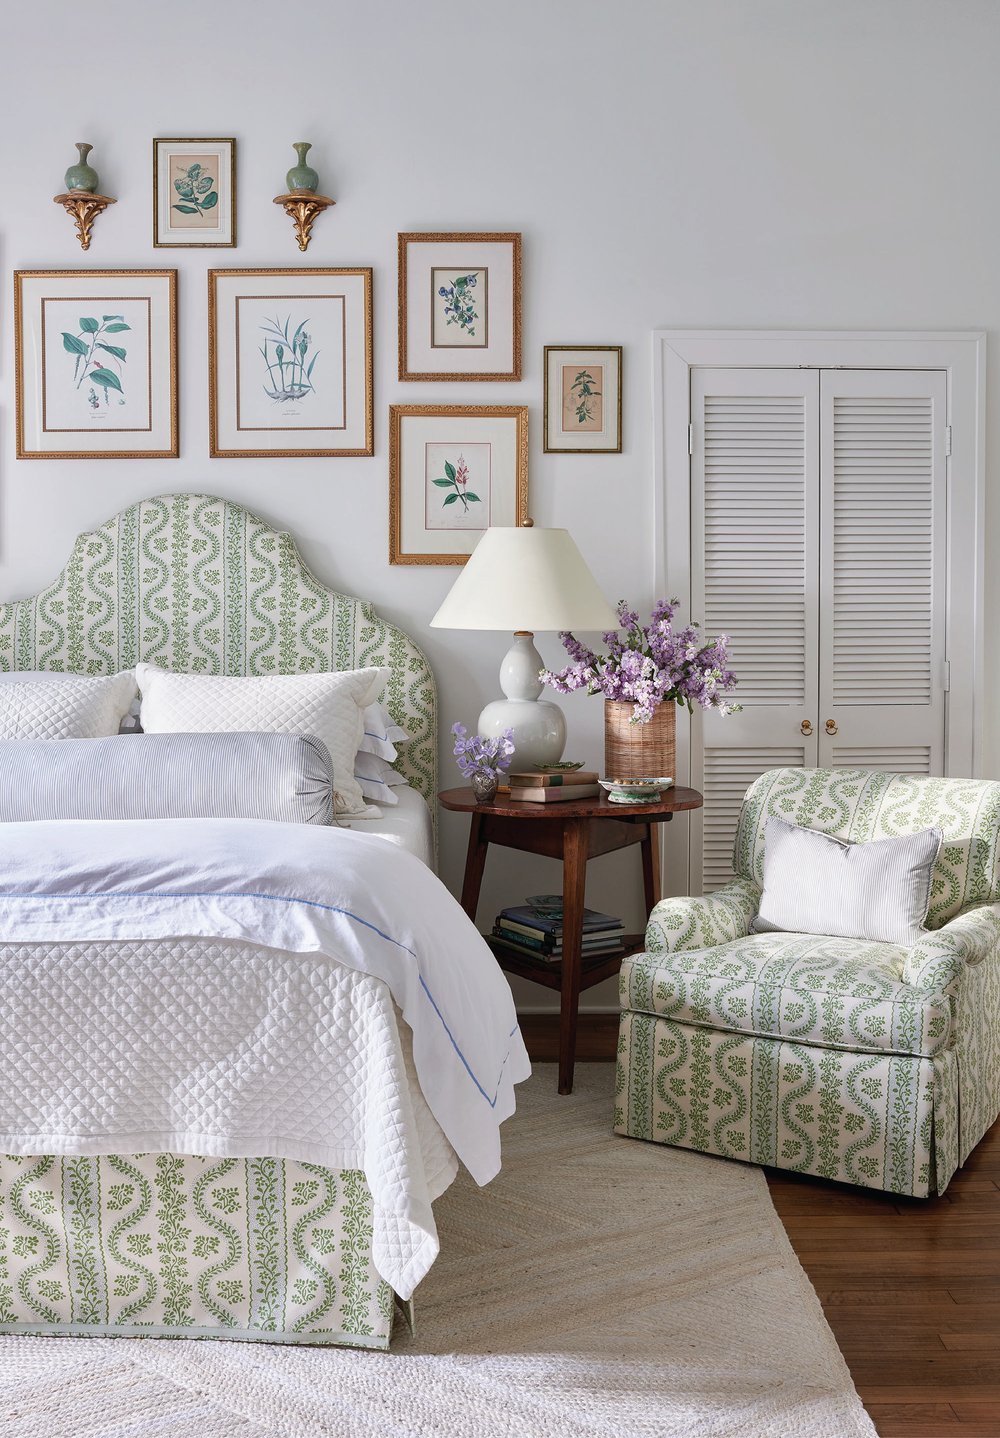 Bedroom in pastel and greens featured in interiors designed by Heather Chadduck